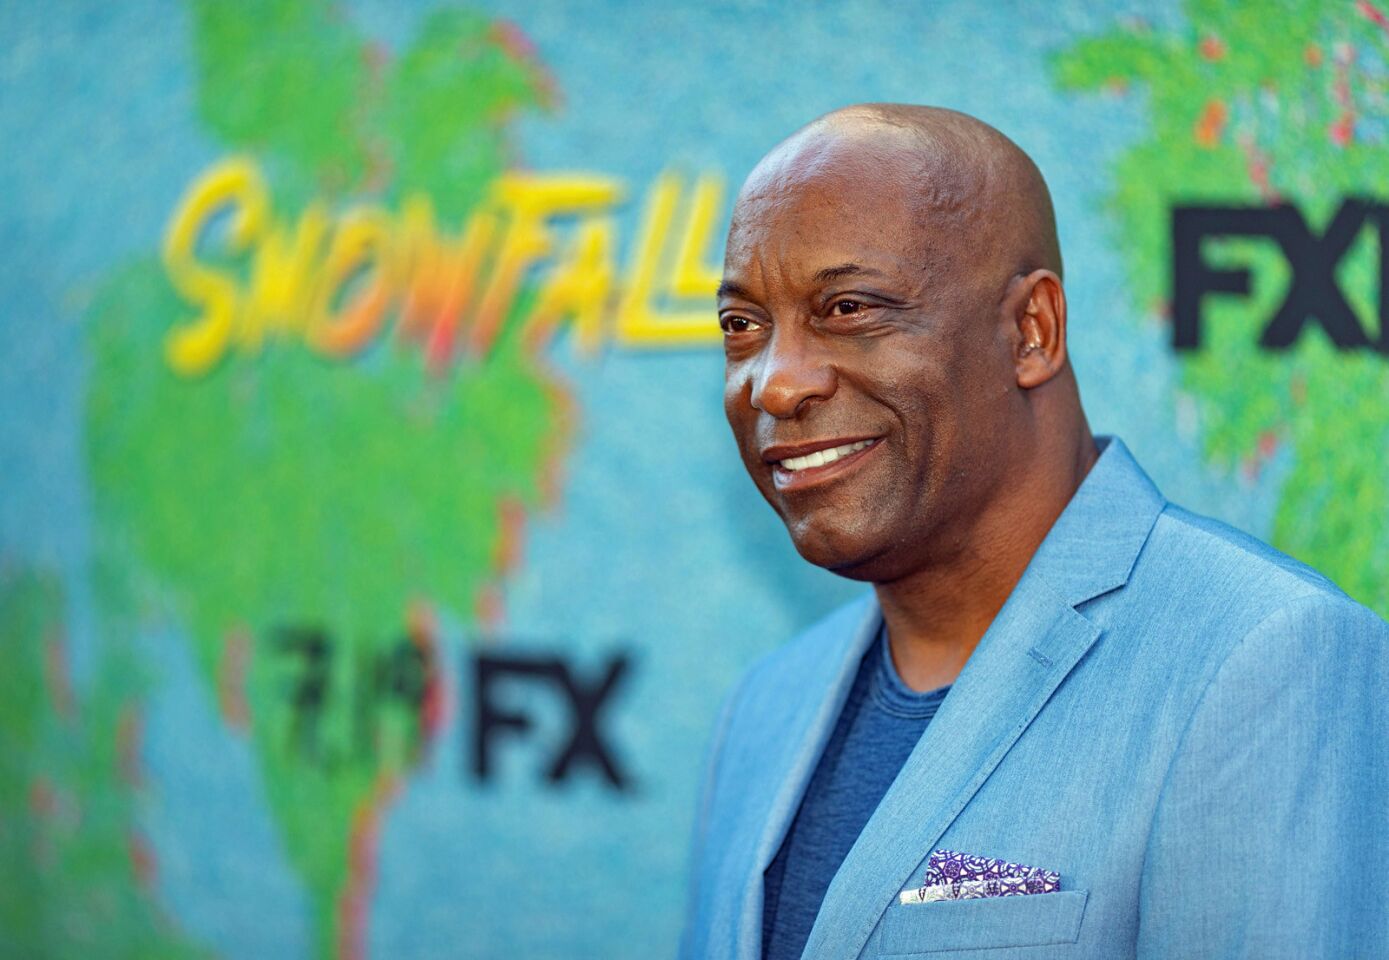 John Singleton's 1991 debut, “Boyz n the Hood,” was an inner-city coming-of-age story that earned two Oscar nominations and put the young filmmaker in the company of emerging black moviemakers such as Spike Lee and Mario Van Peebles. Singleton went on to direct "Poetic Justice" (1993), “Higher Learning” (1995) and “Baby Boy” (2001), which featured Taraji P. Henson at the start of her career. He was 51.